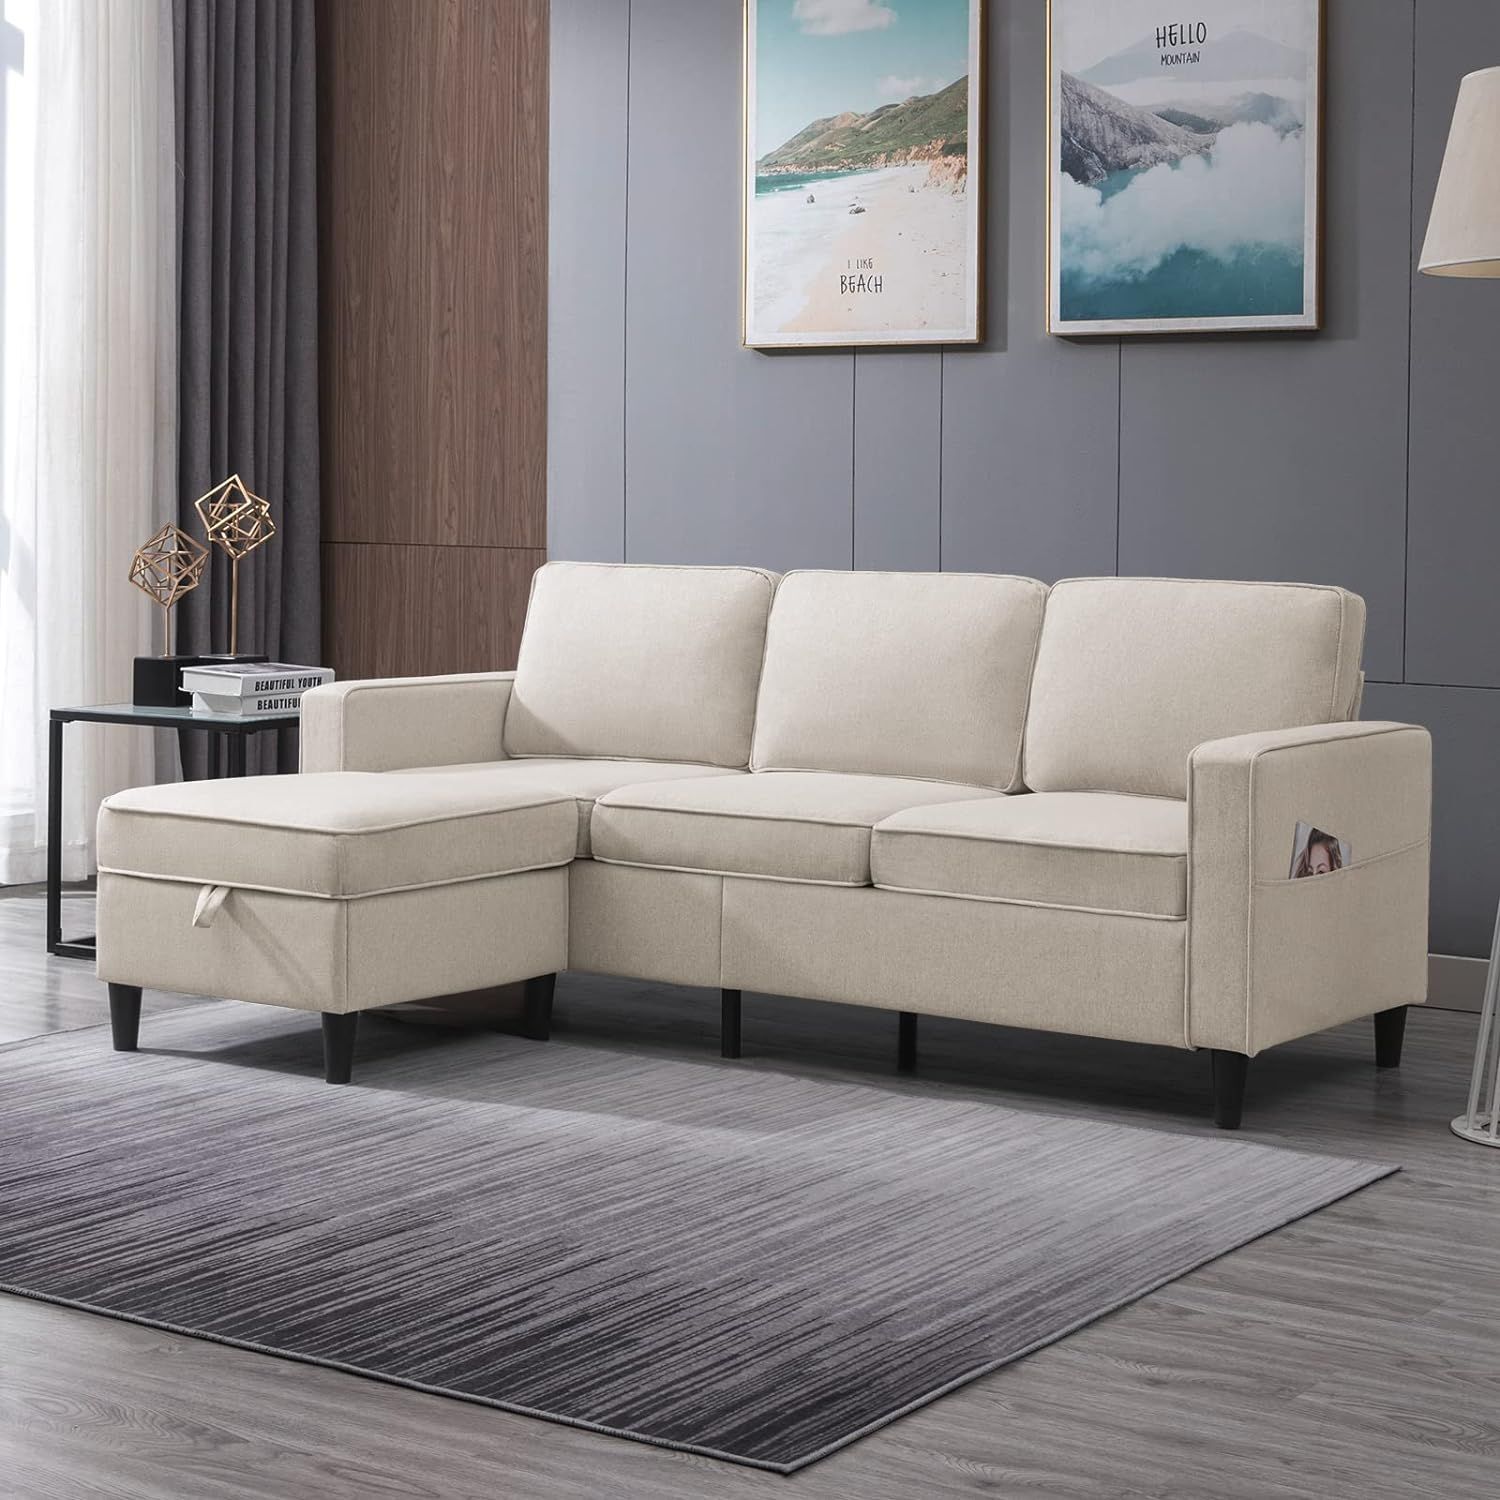 Convertible L Shape Sectional Sofa With Storage, France | Ubuy With Regard To Convertible L Shaped Sectional Sofas (Photo 1 of 15)